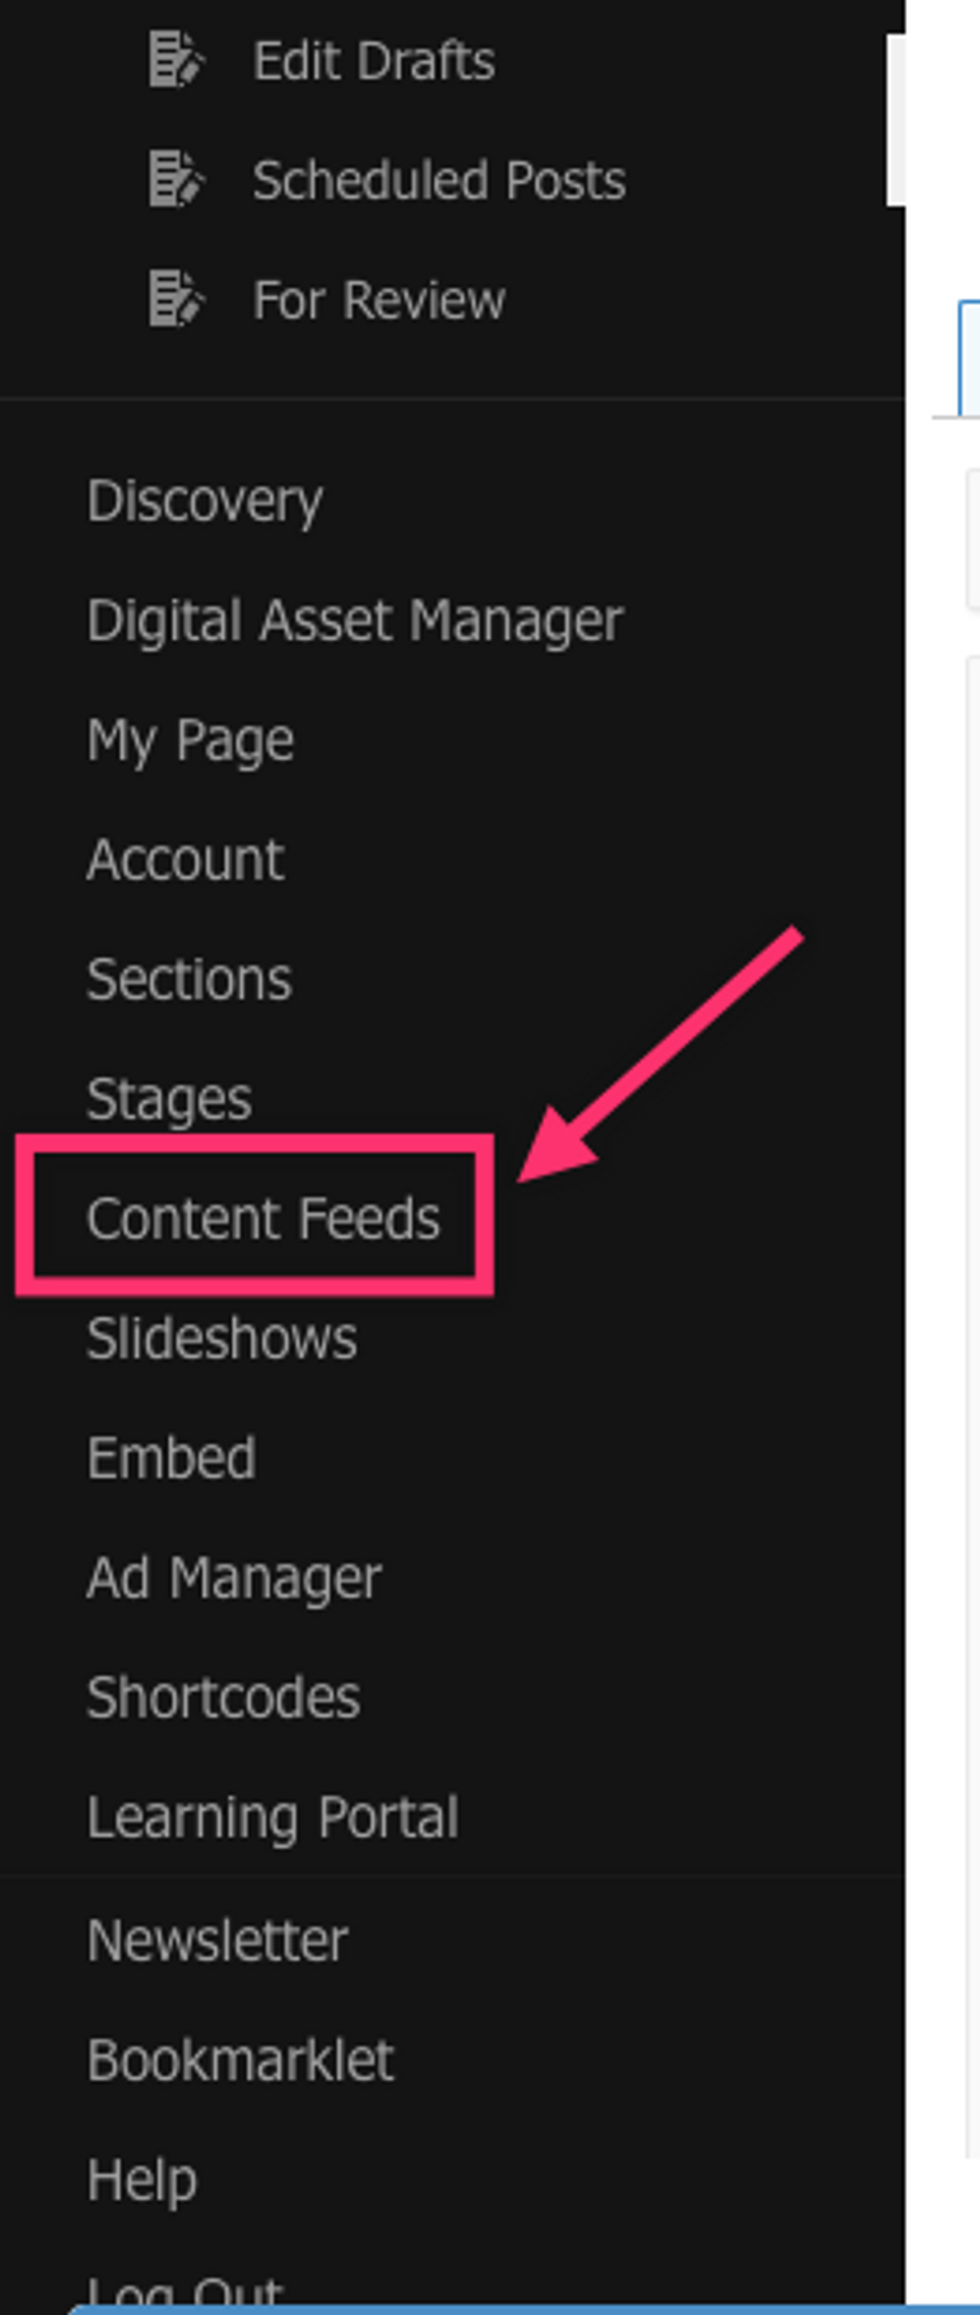 Content Feeds: Connecting Feeds to Your Site